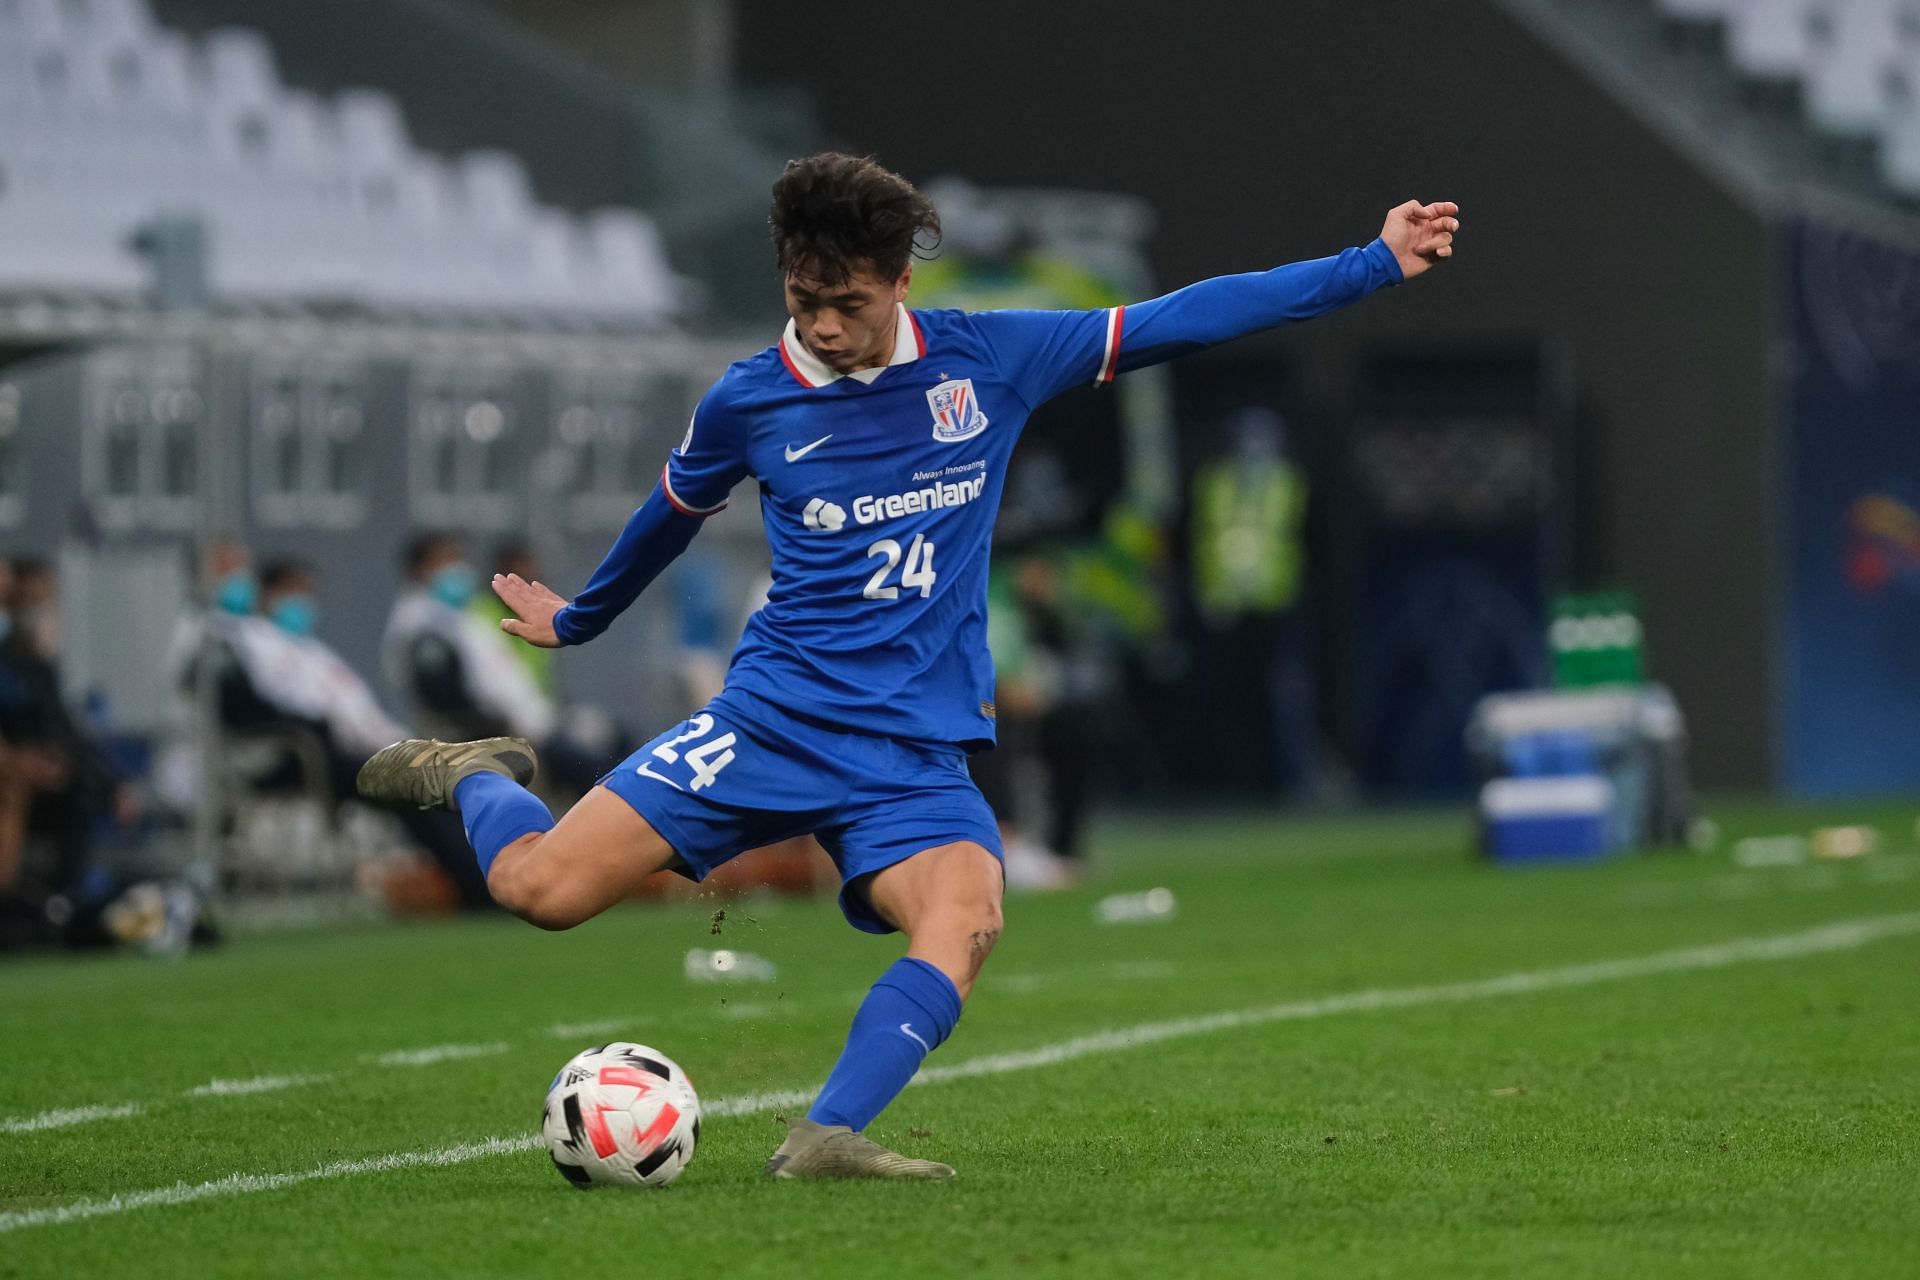 Shanghai Shenhua will square off against Qingdao FC in the CSL on Sunday